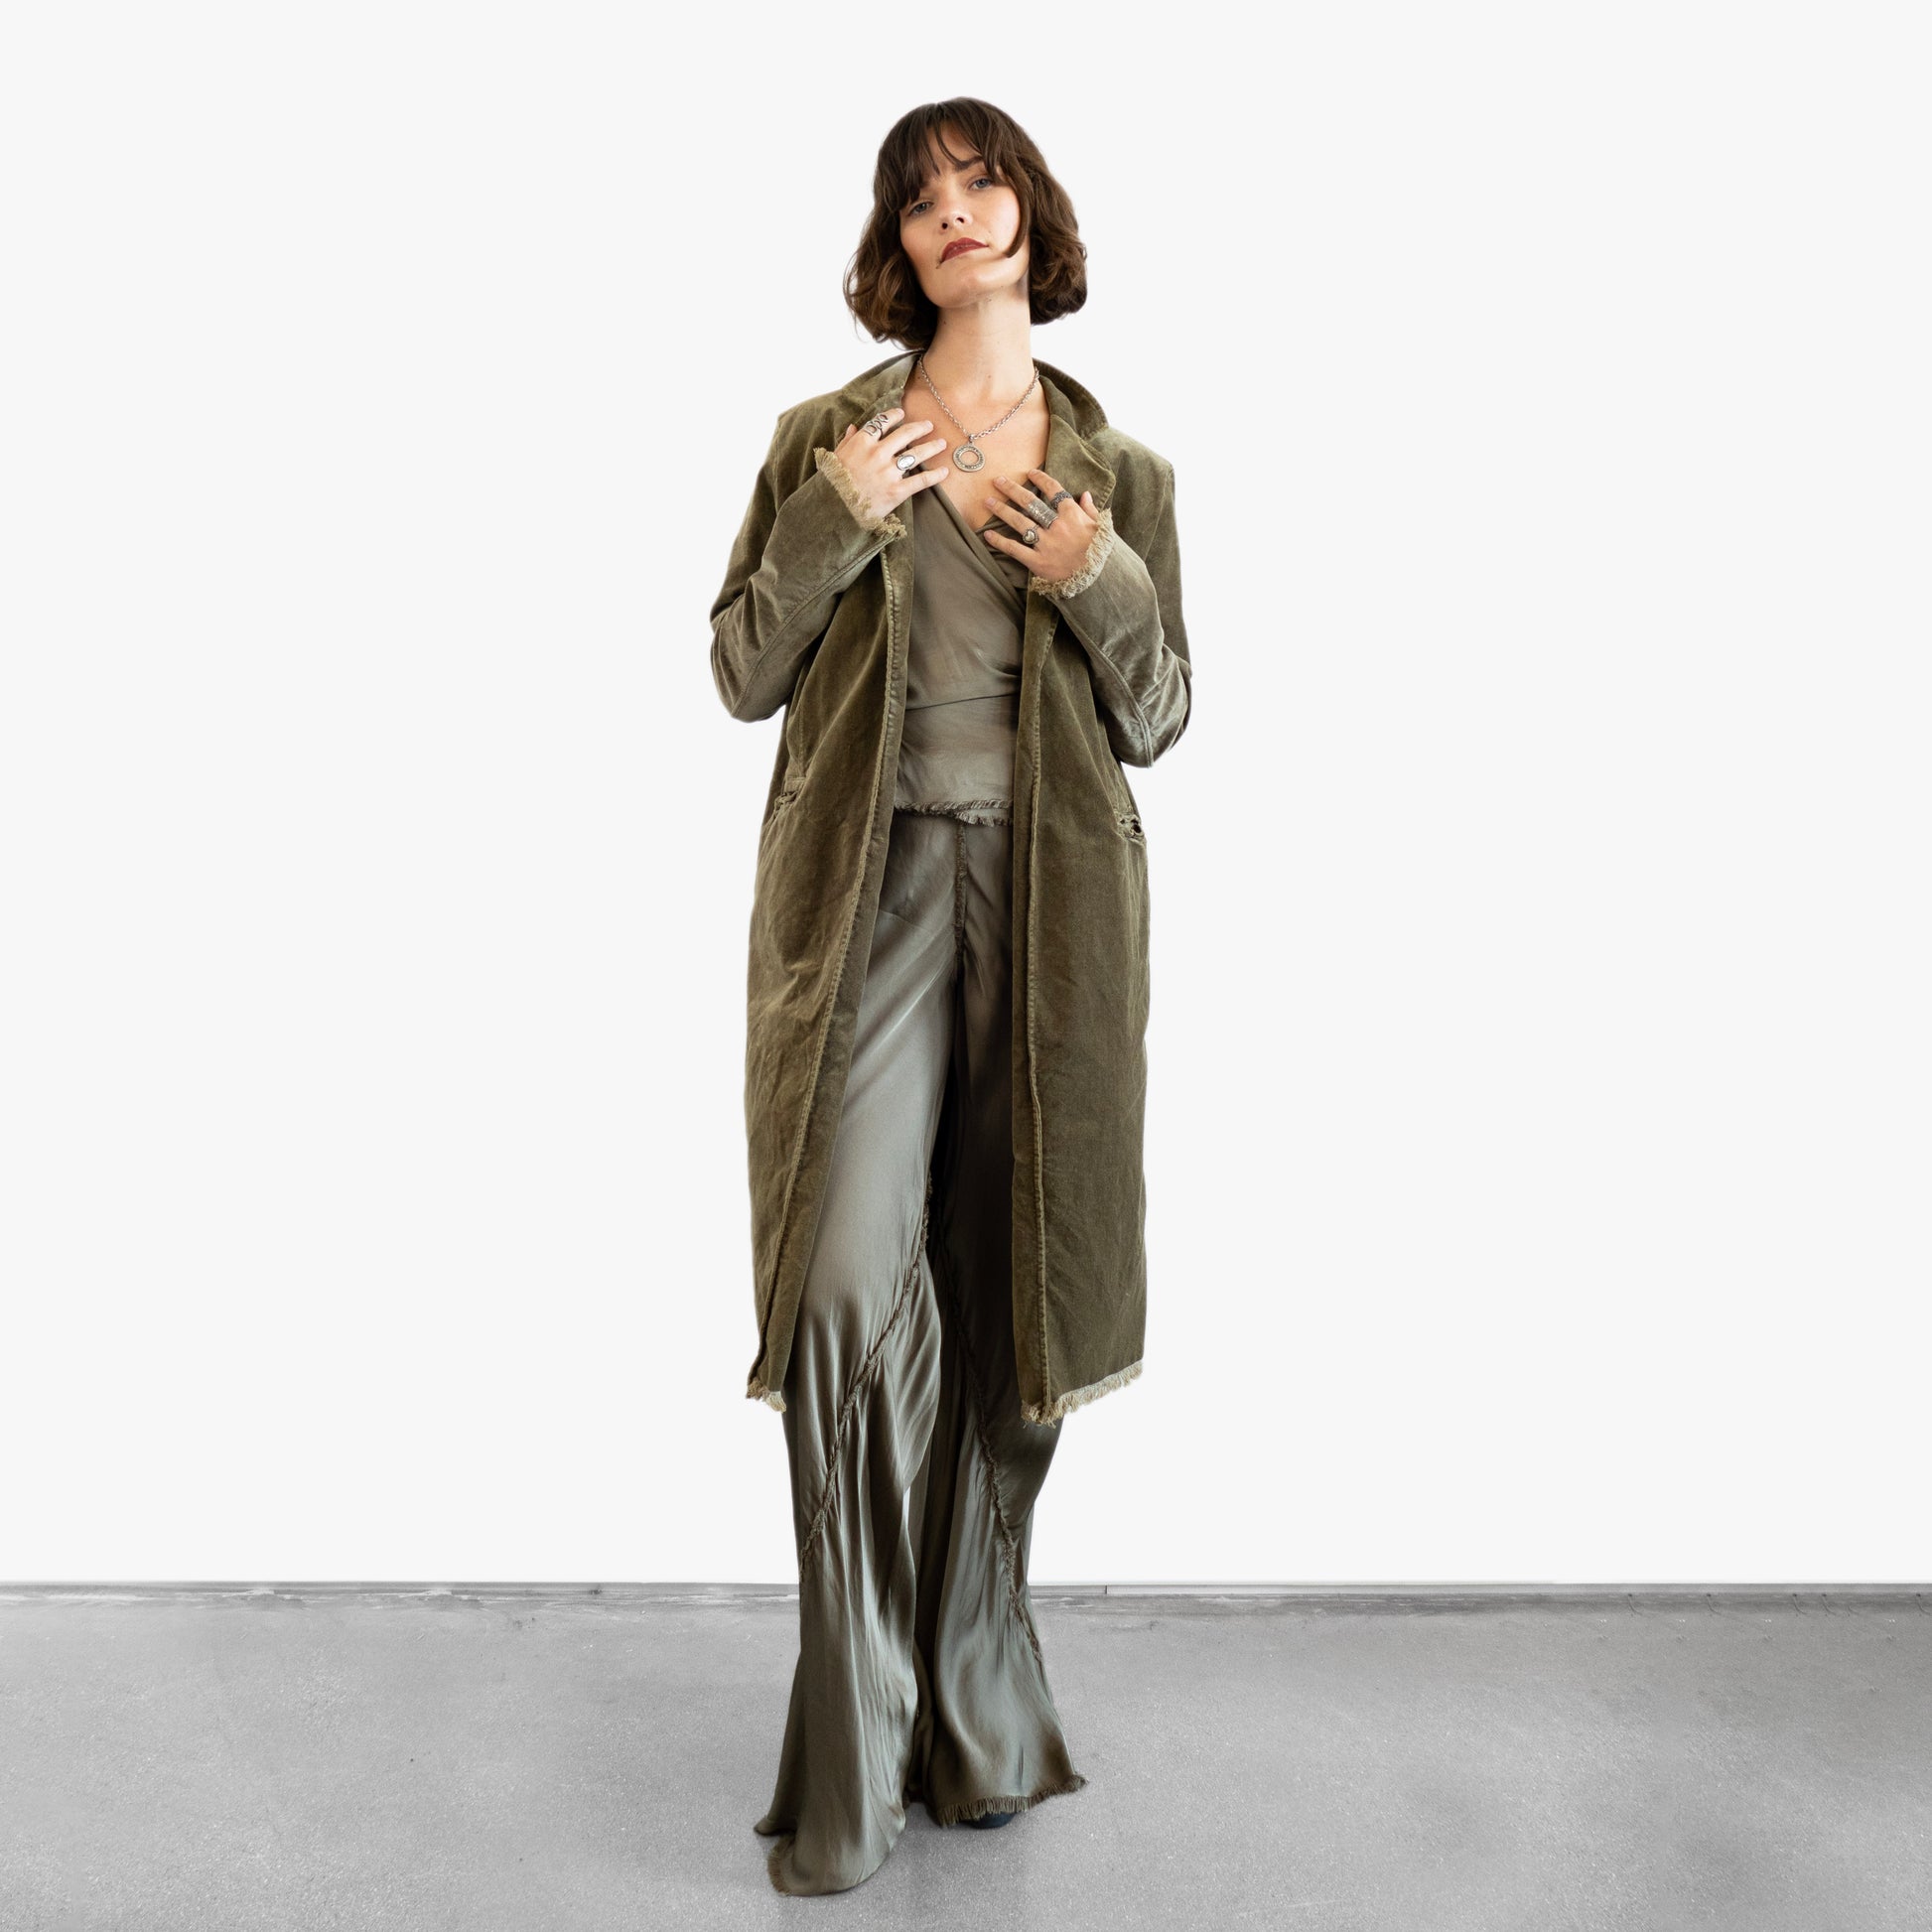 Model wearing a green velvet coat over a green silk wrap top and pants